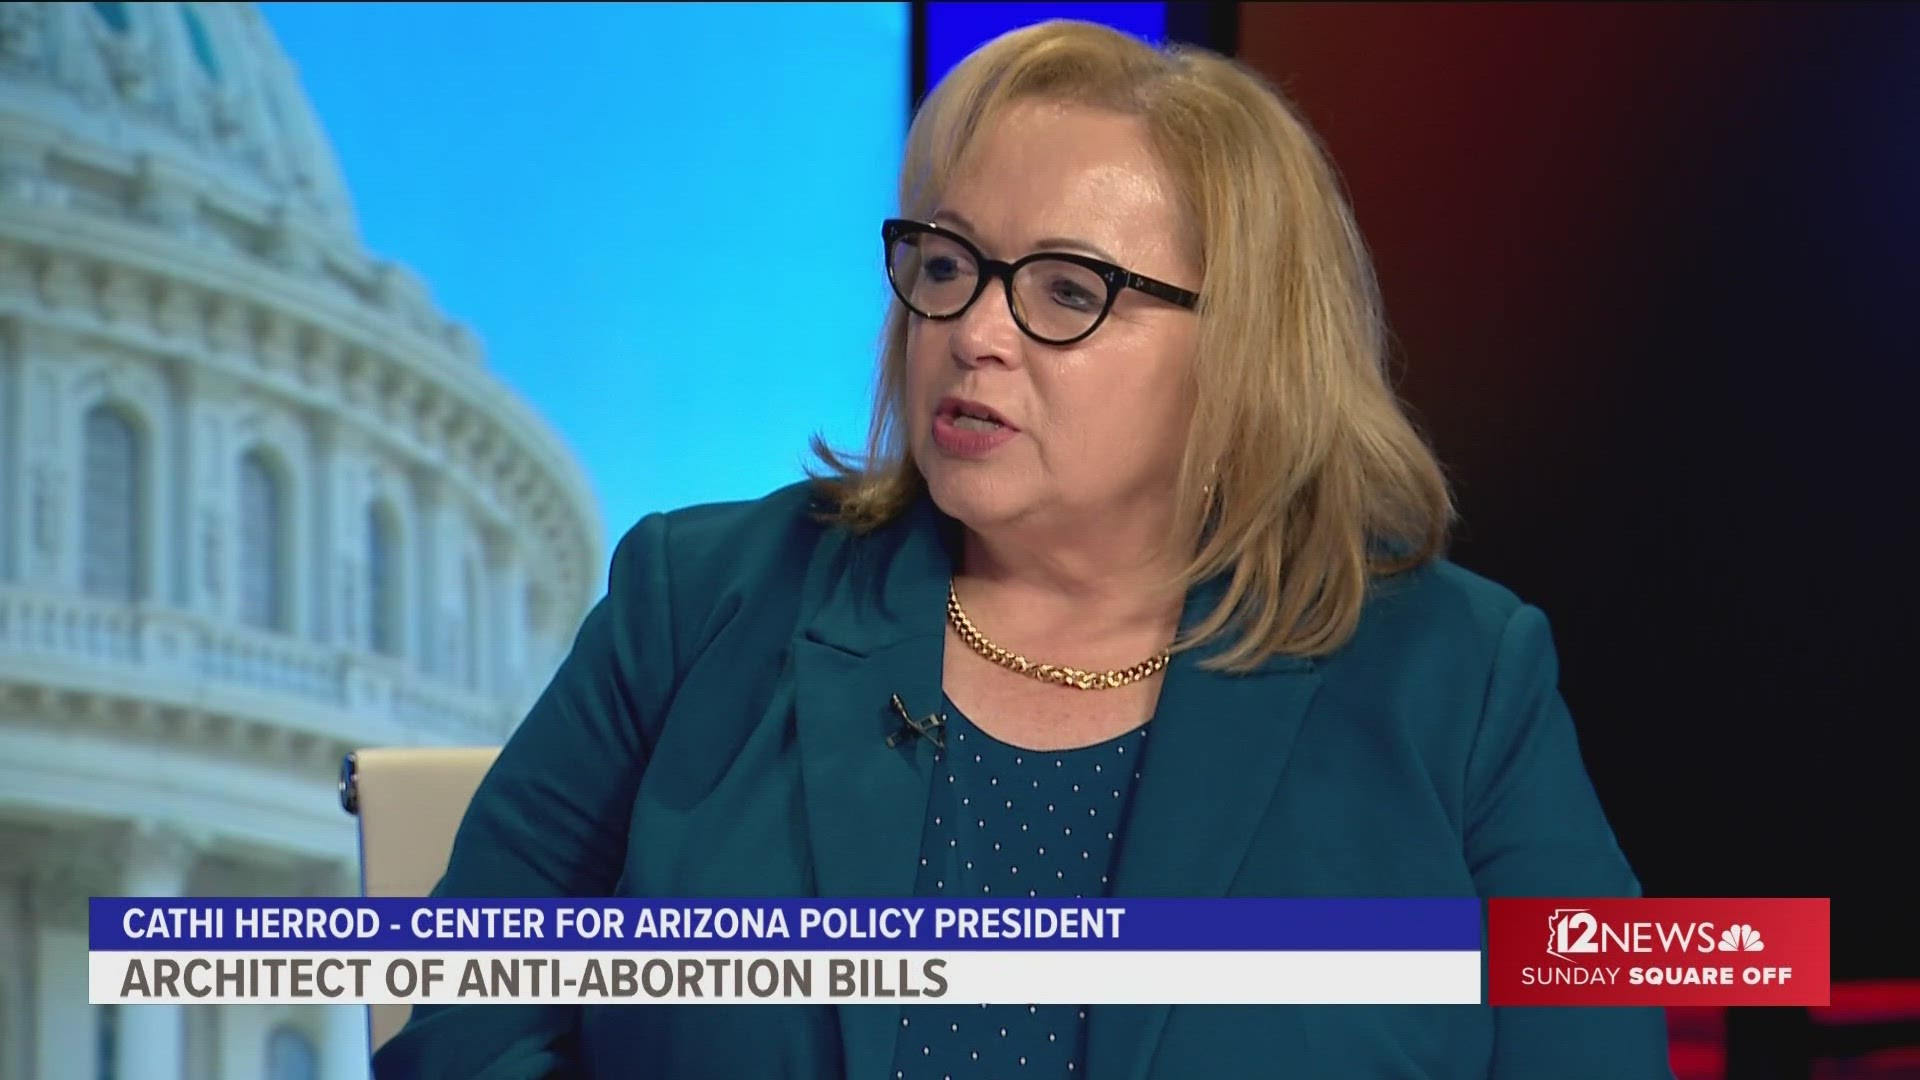 Cathi Herrod of the Center for Arizona Policy has been the leading architect of anti-abortion bills at the Arizona Legislature.